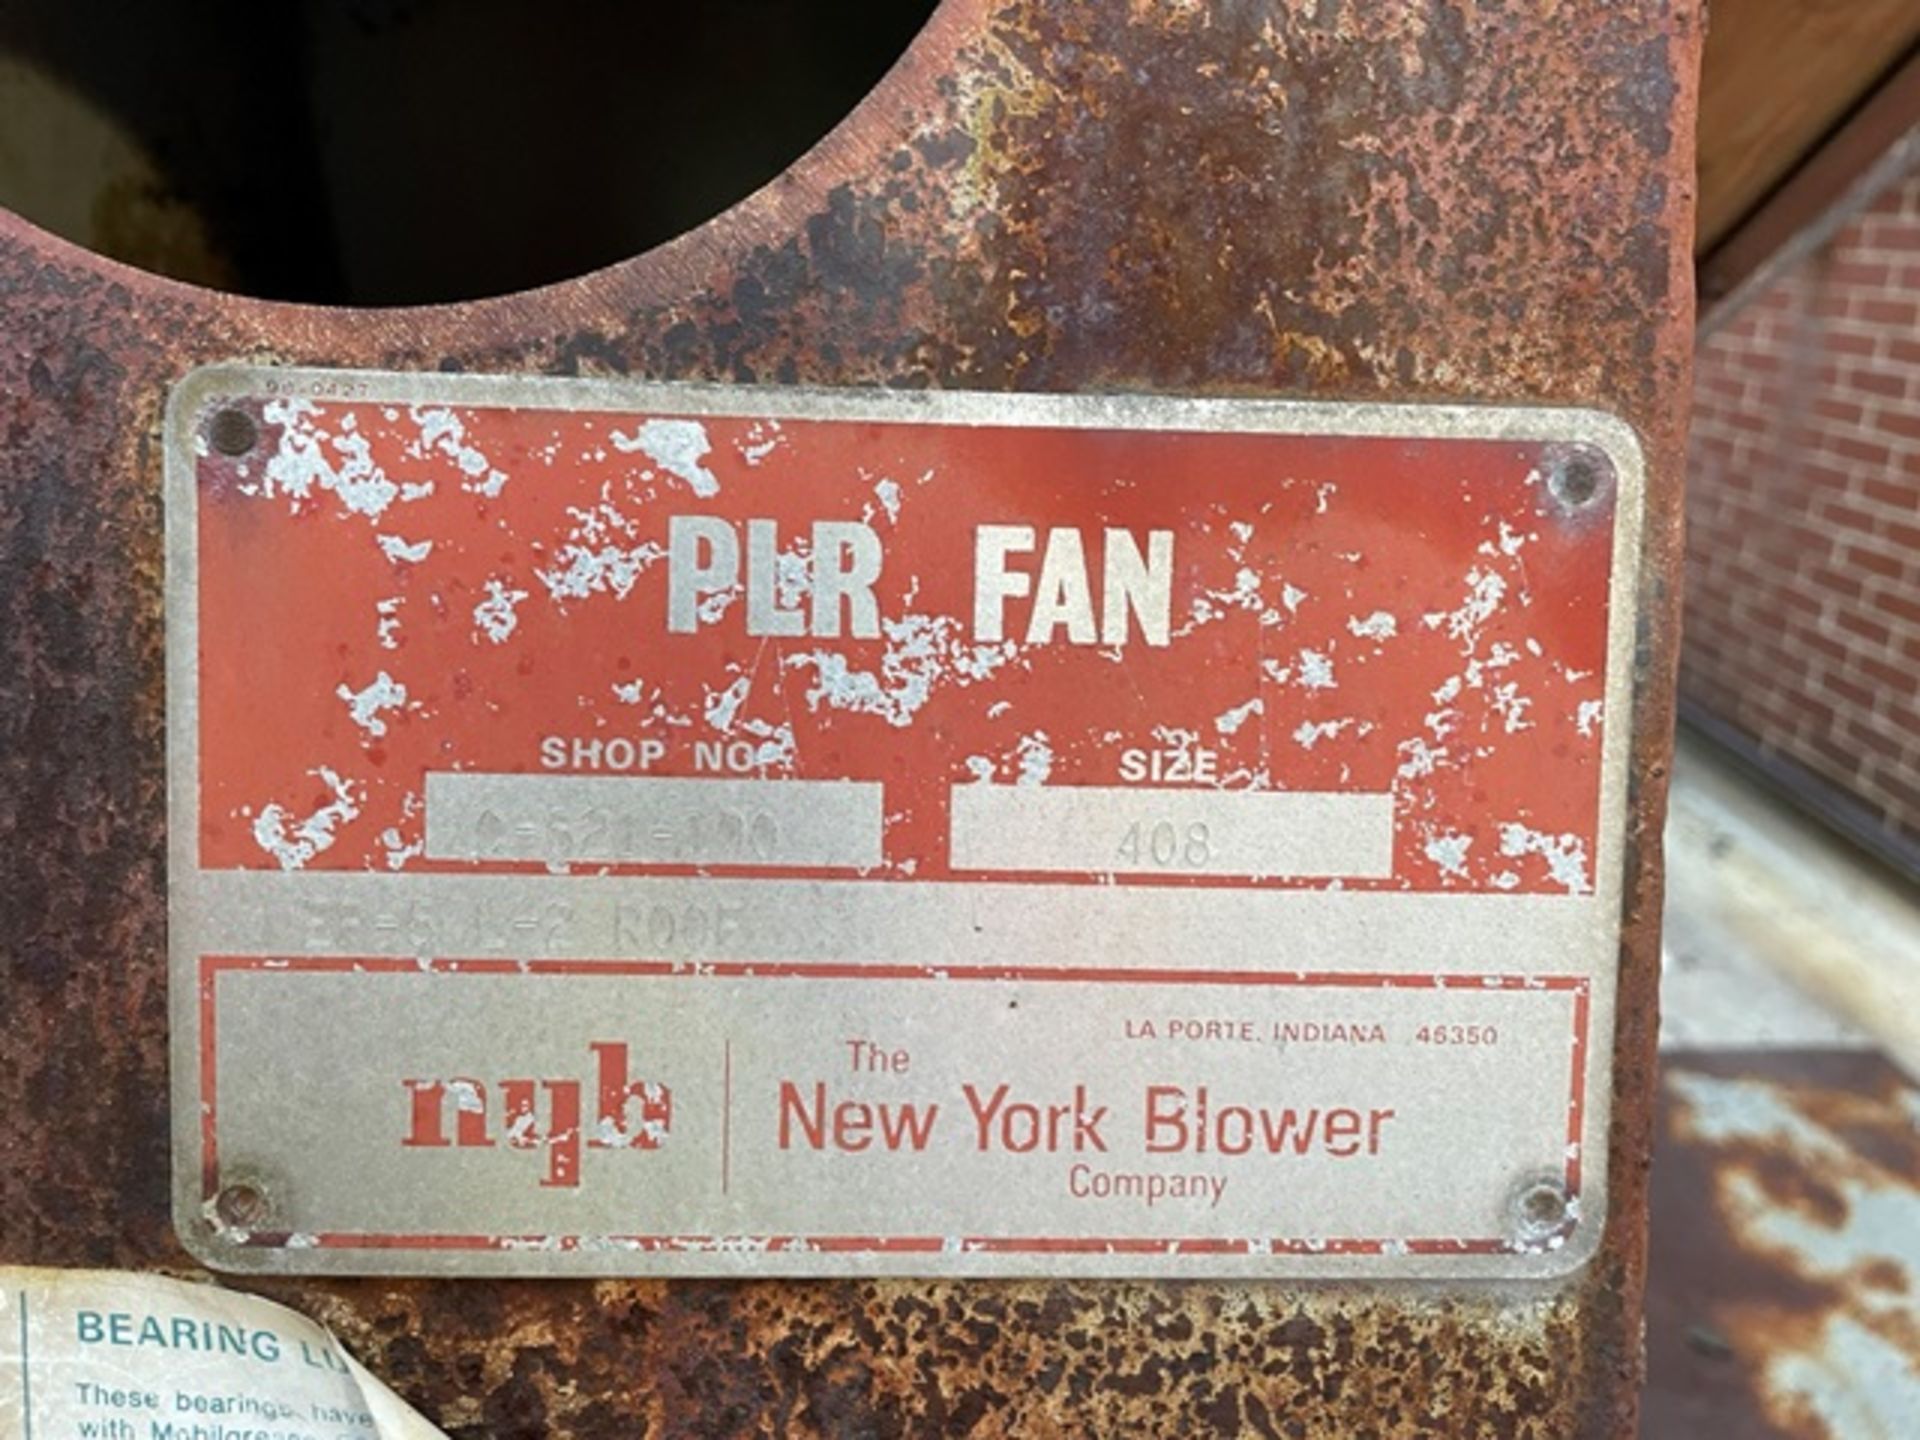 New York Blower Package, Size 408/15 HP Motor, Rigging & Loading Fee: $2000 - Image 2 of 3